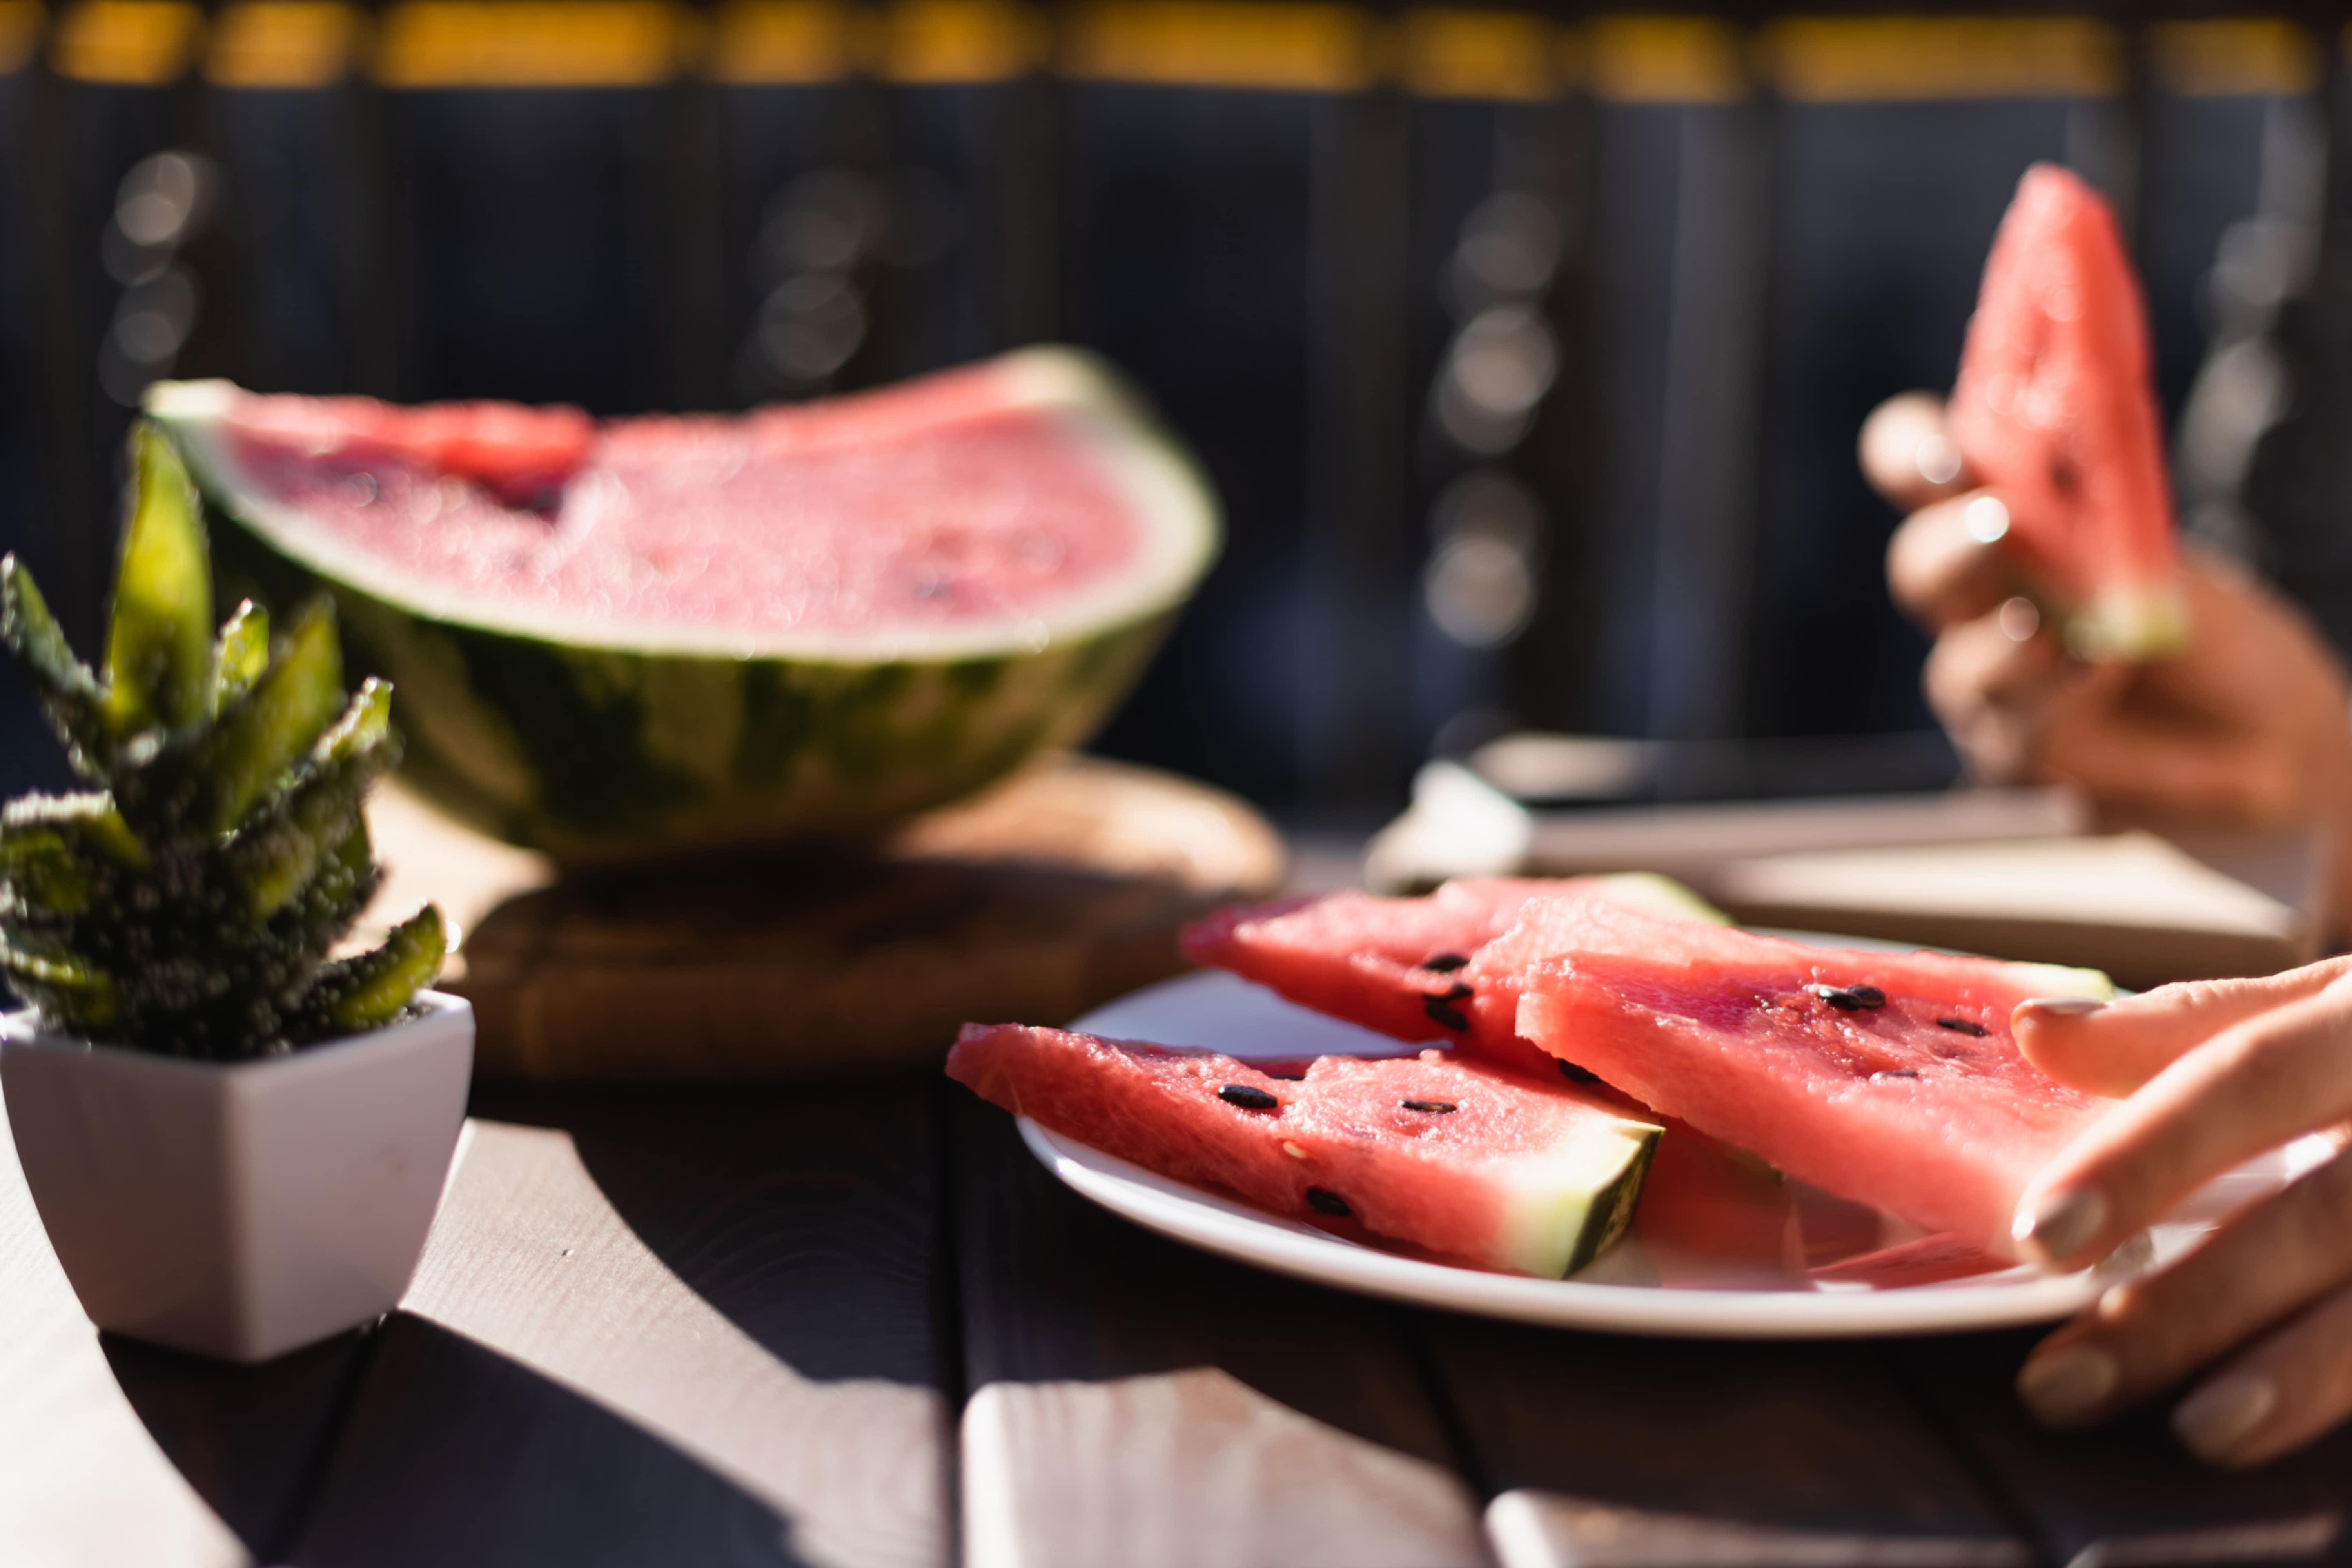 Health Risks What Happens if You Eat Bad Watermelon